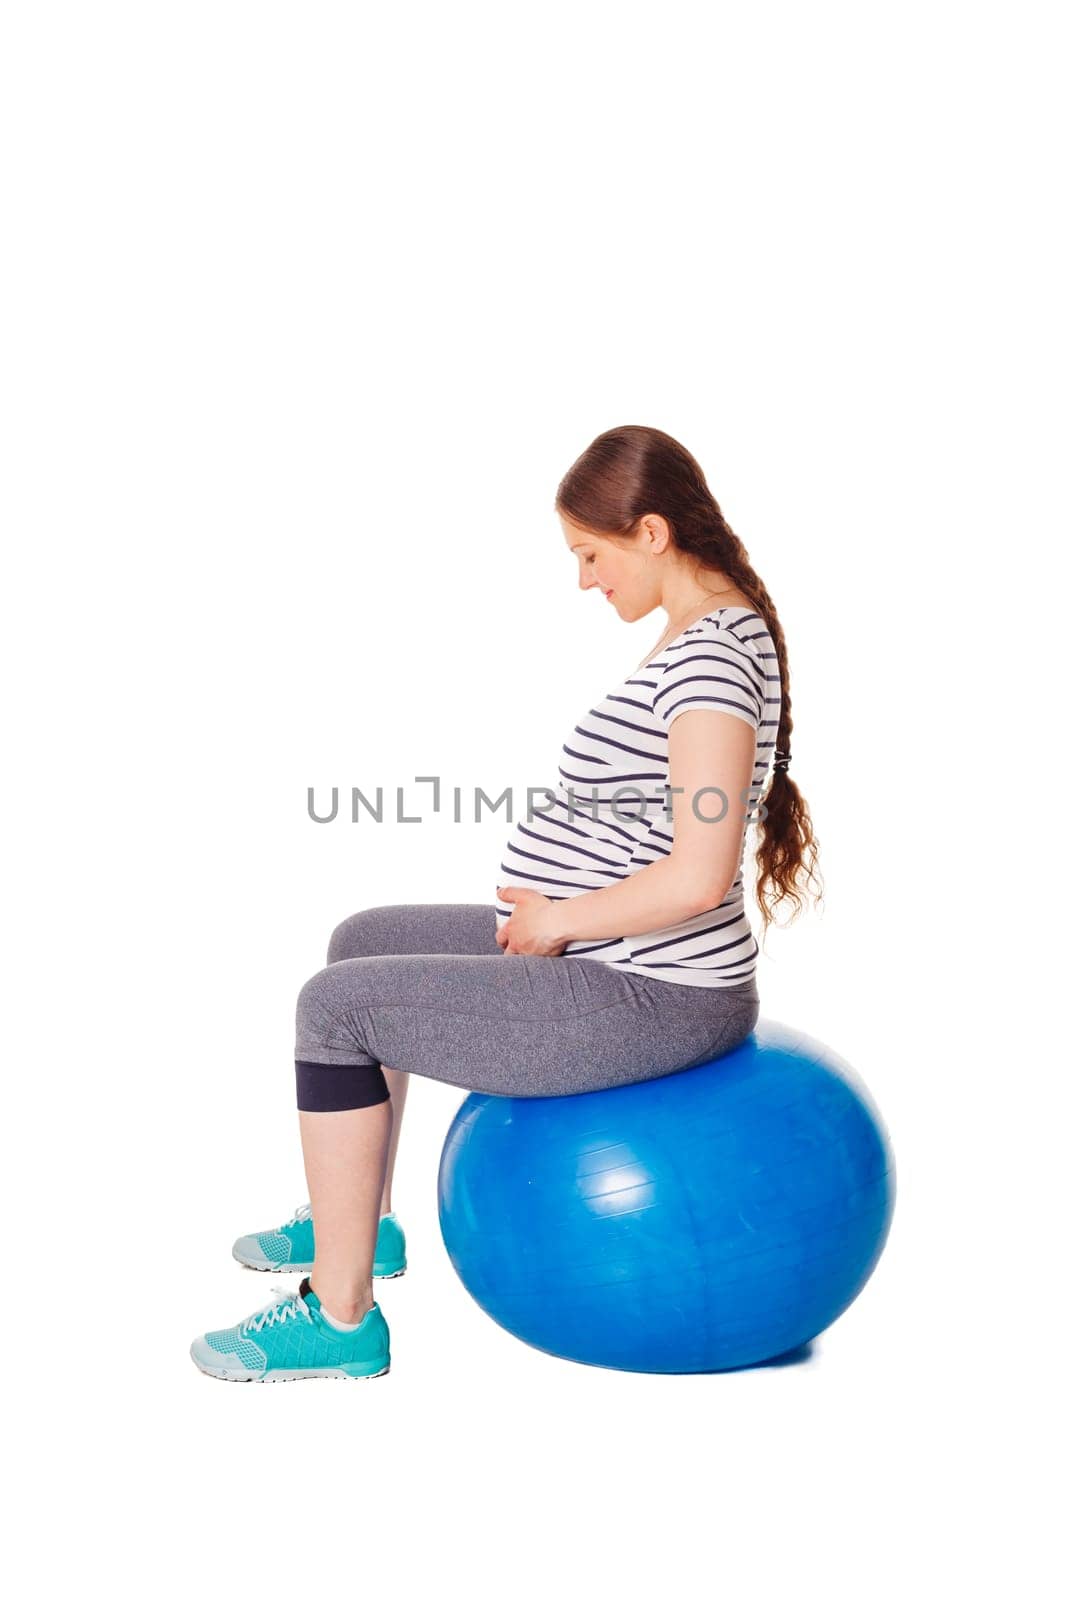 Pregnant woman doing exercises with exercise ball by dimol